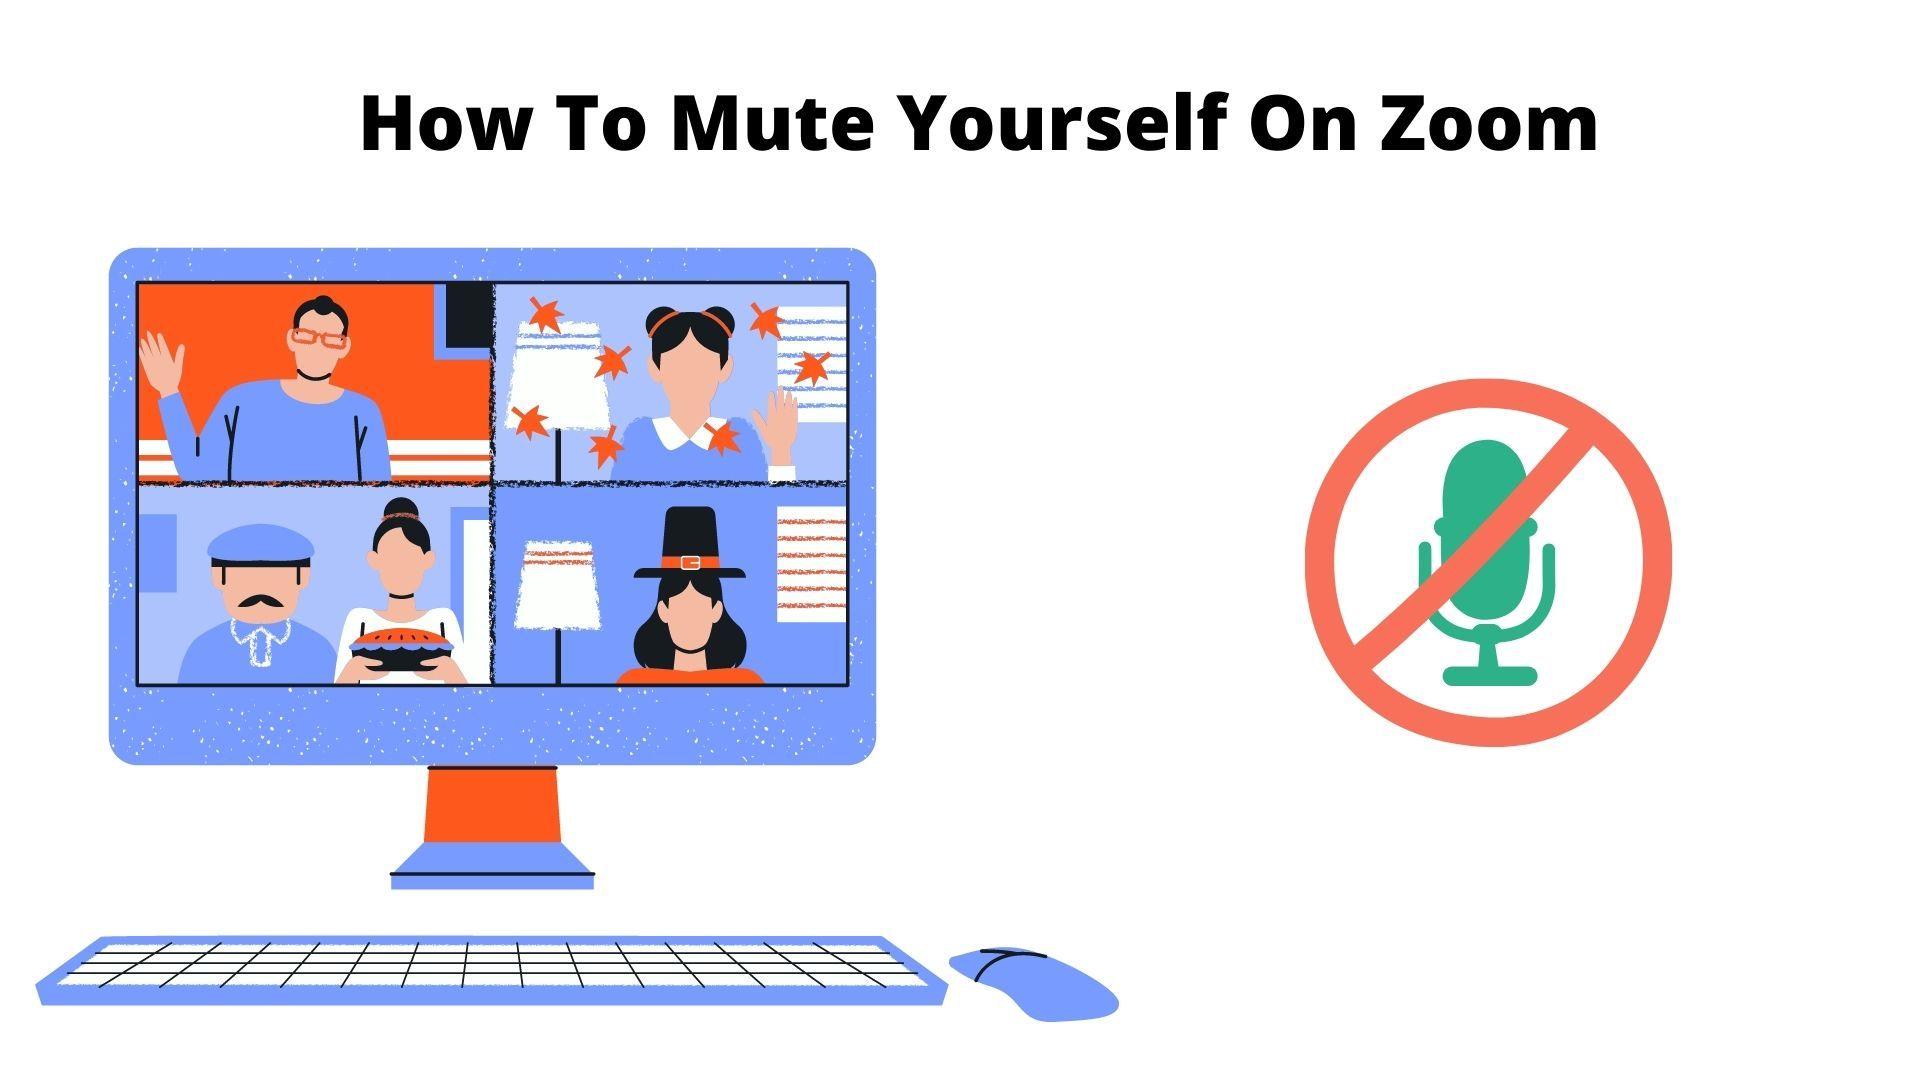 How to Mute on Zoom – Mute Yourself with a Keyboard Shortcut or a Press of a Button